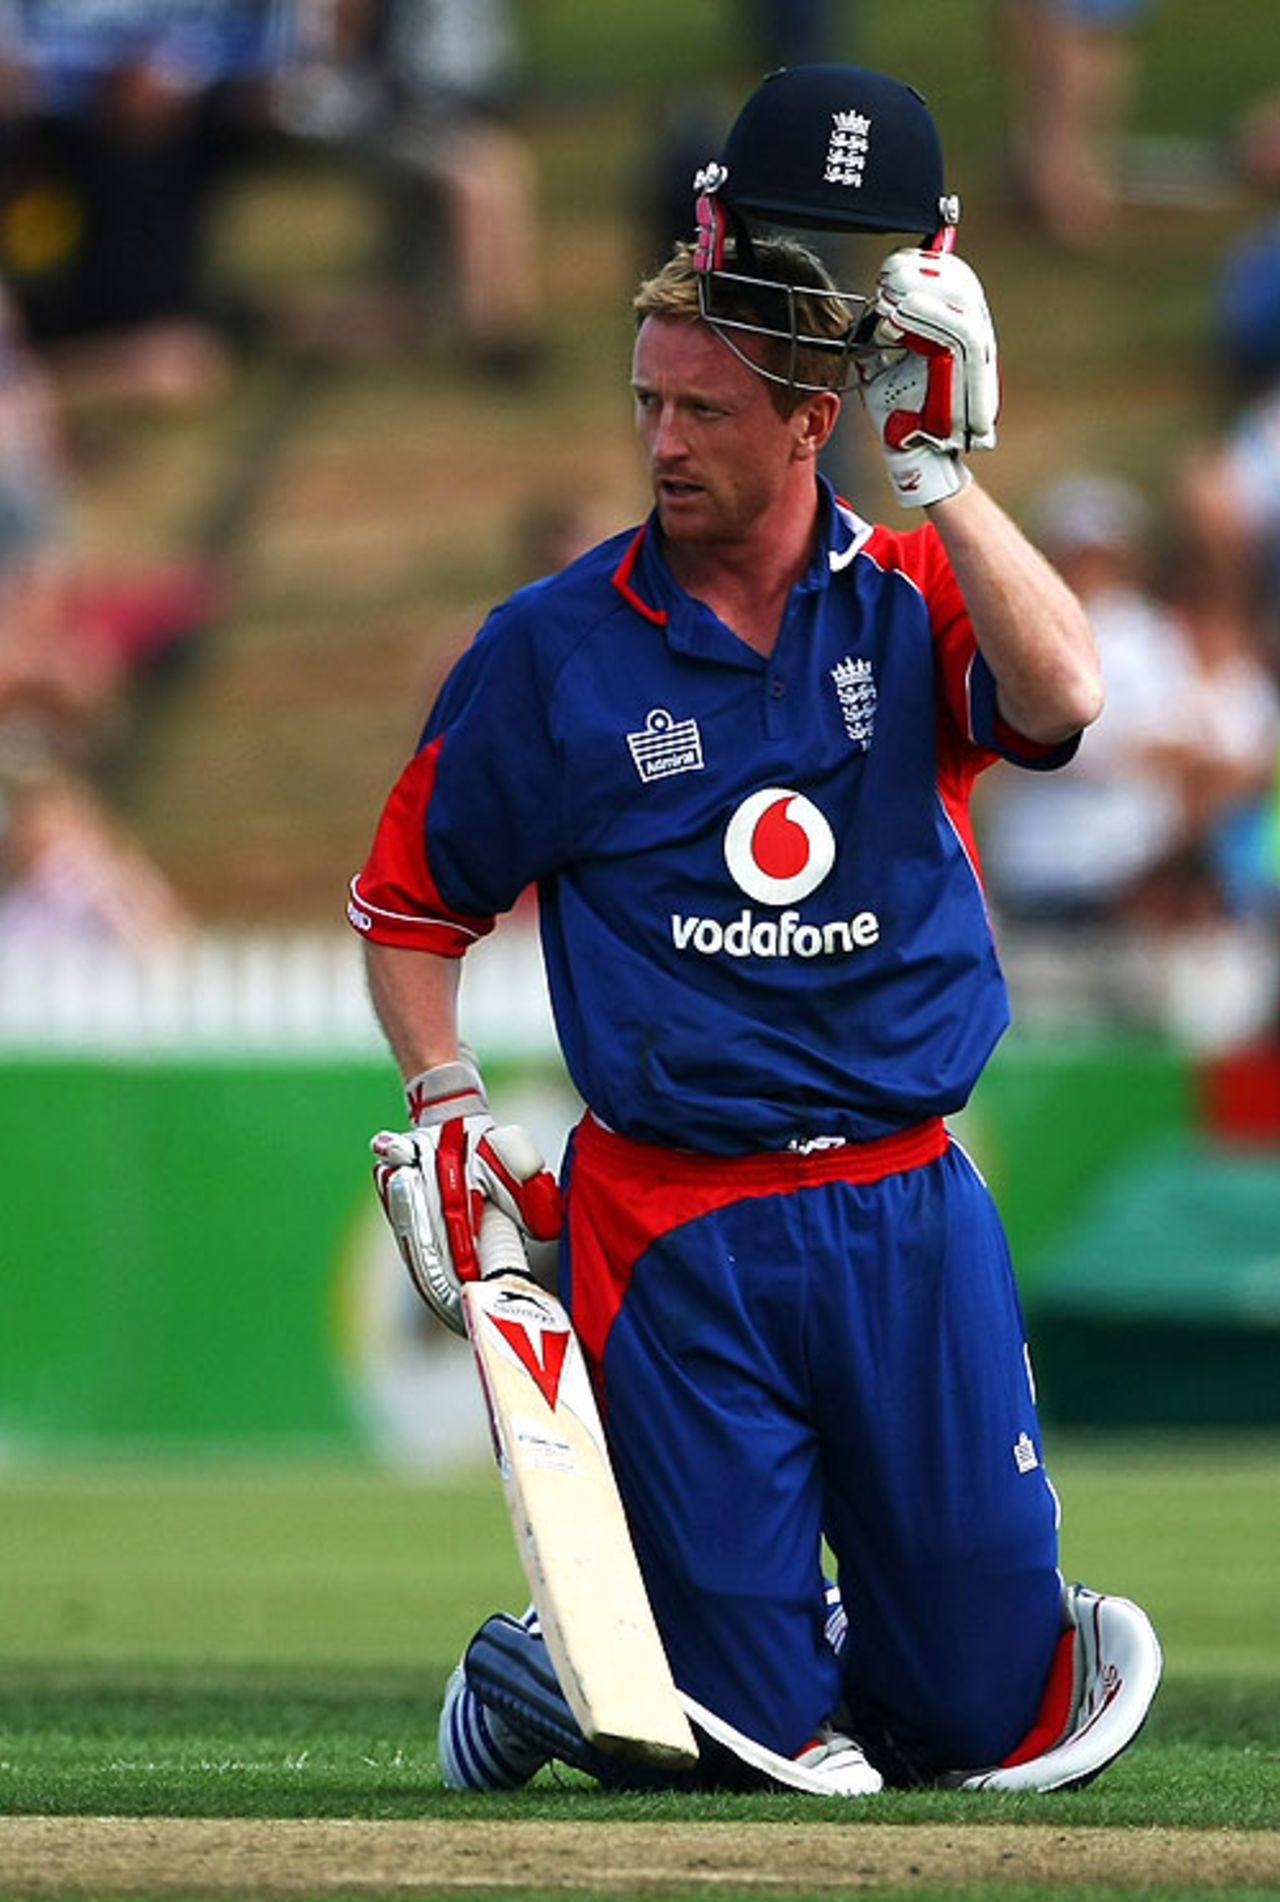 Paul Collingwood contemplates his first-ball run-out, New Zealand v England, 2nd ODI, Hamilton, February 12, 2008